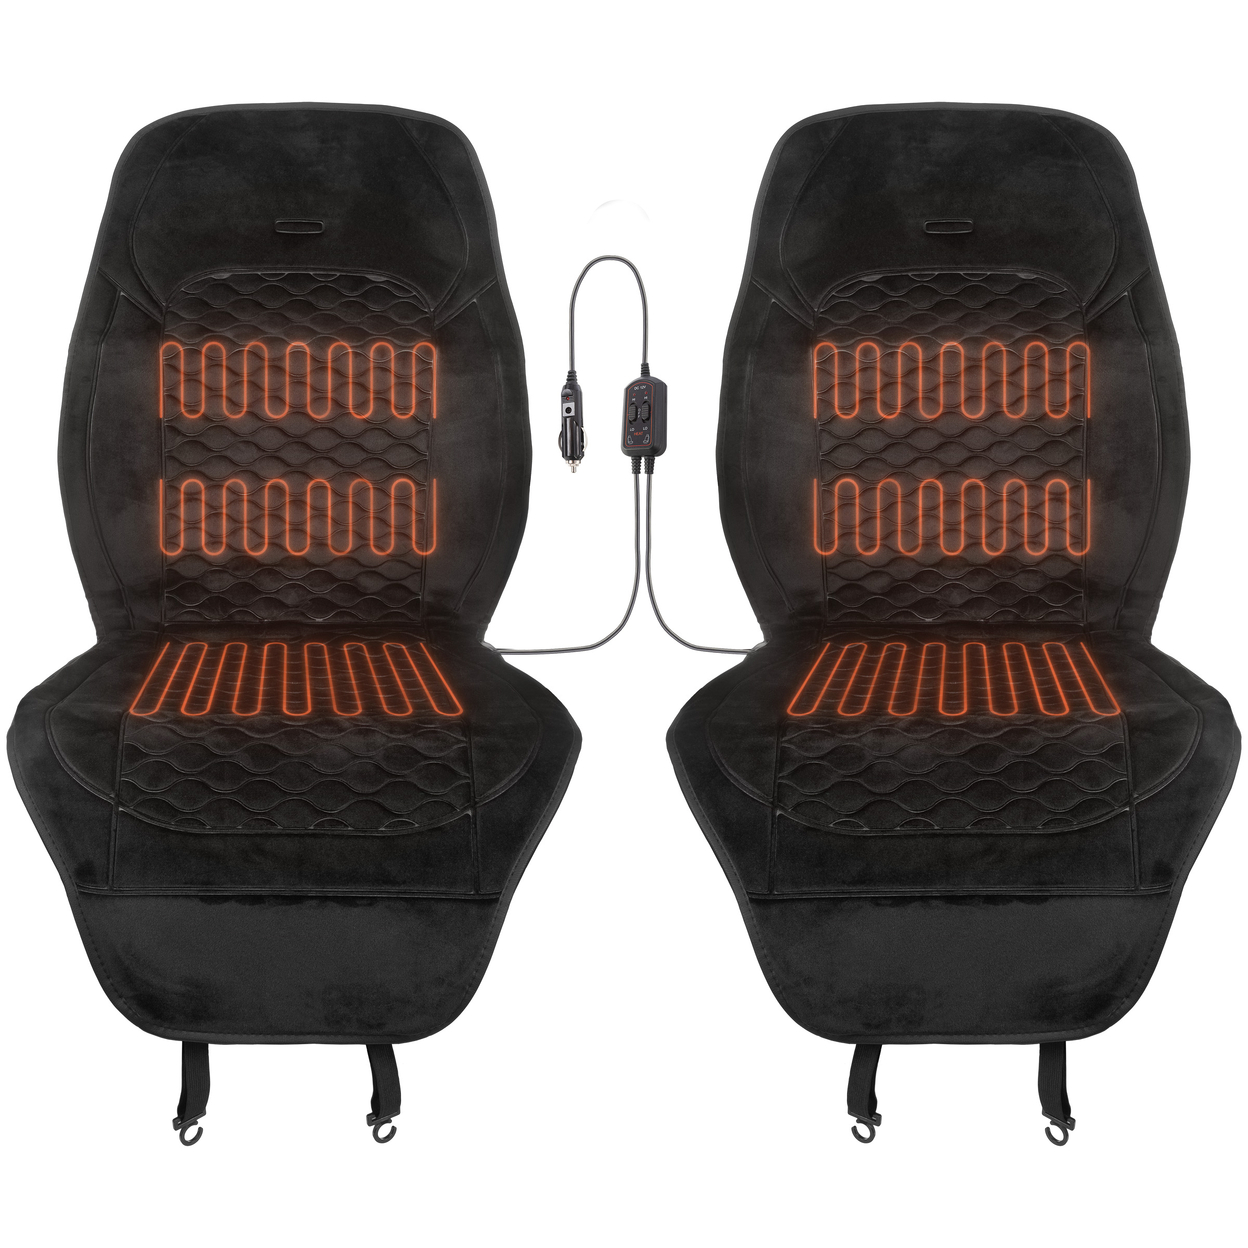 Heated Seat Covers For Cars 2Pack Universal 12V Heating Pads For Car Seats